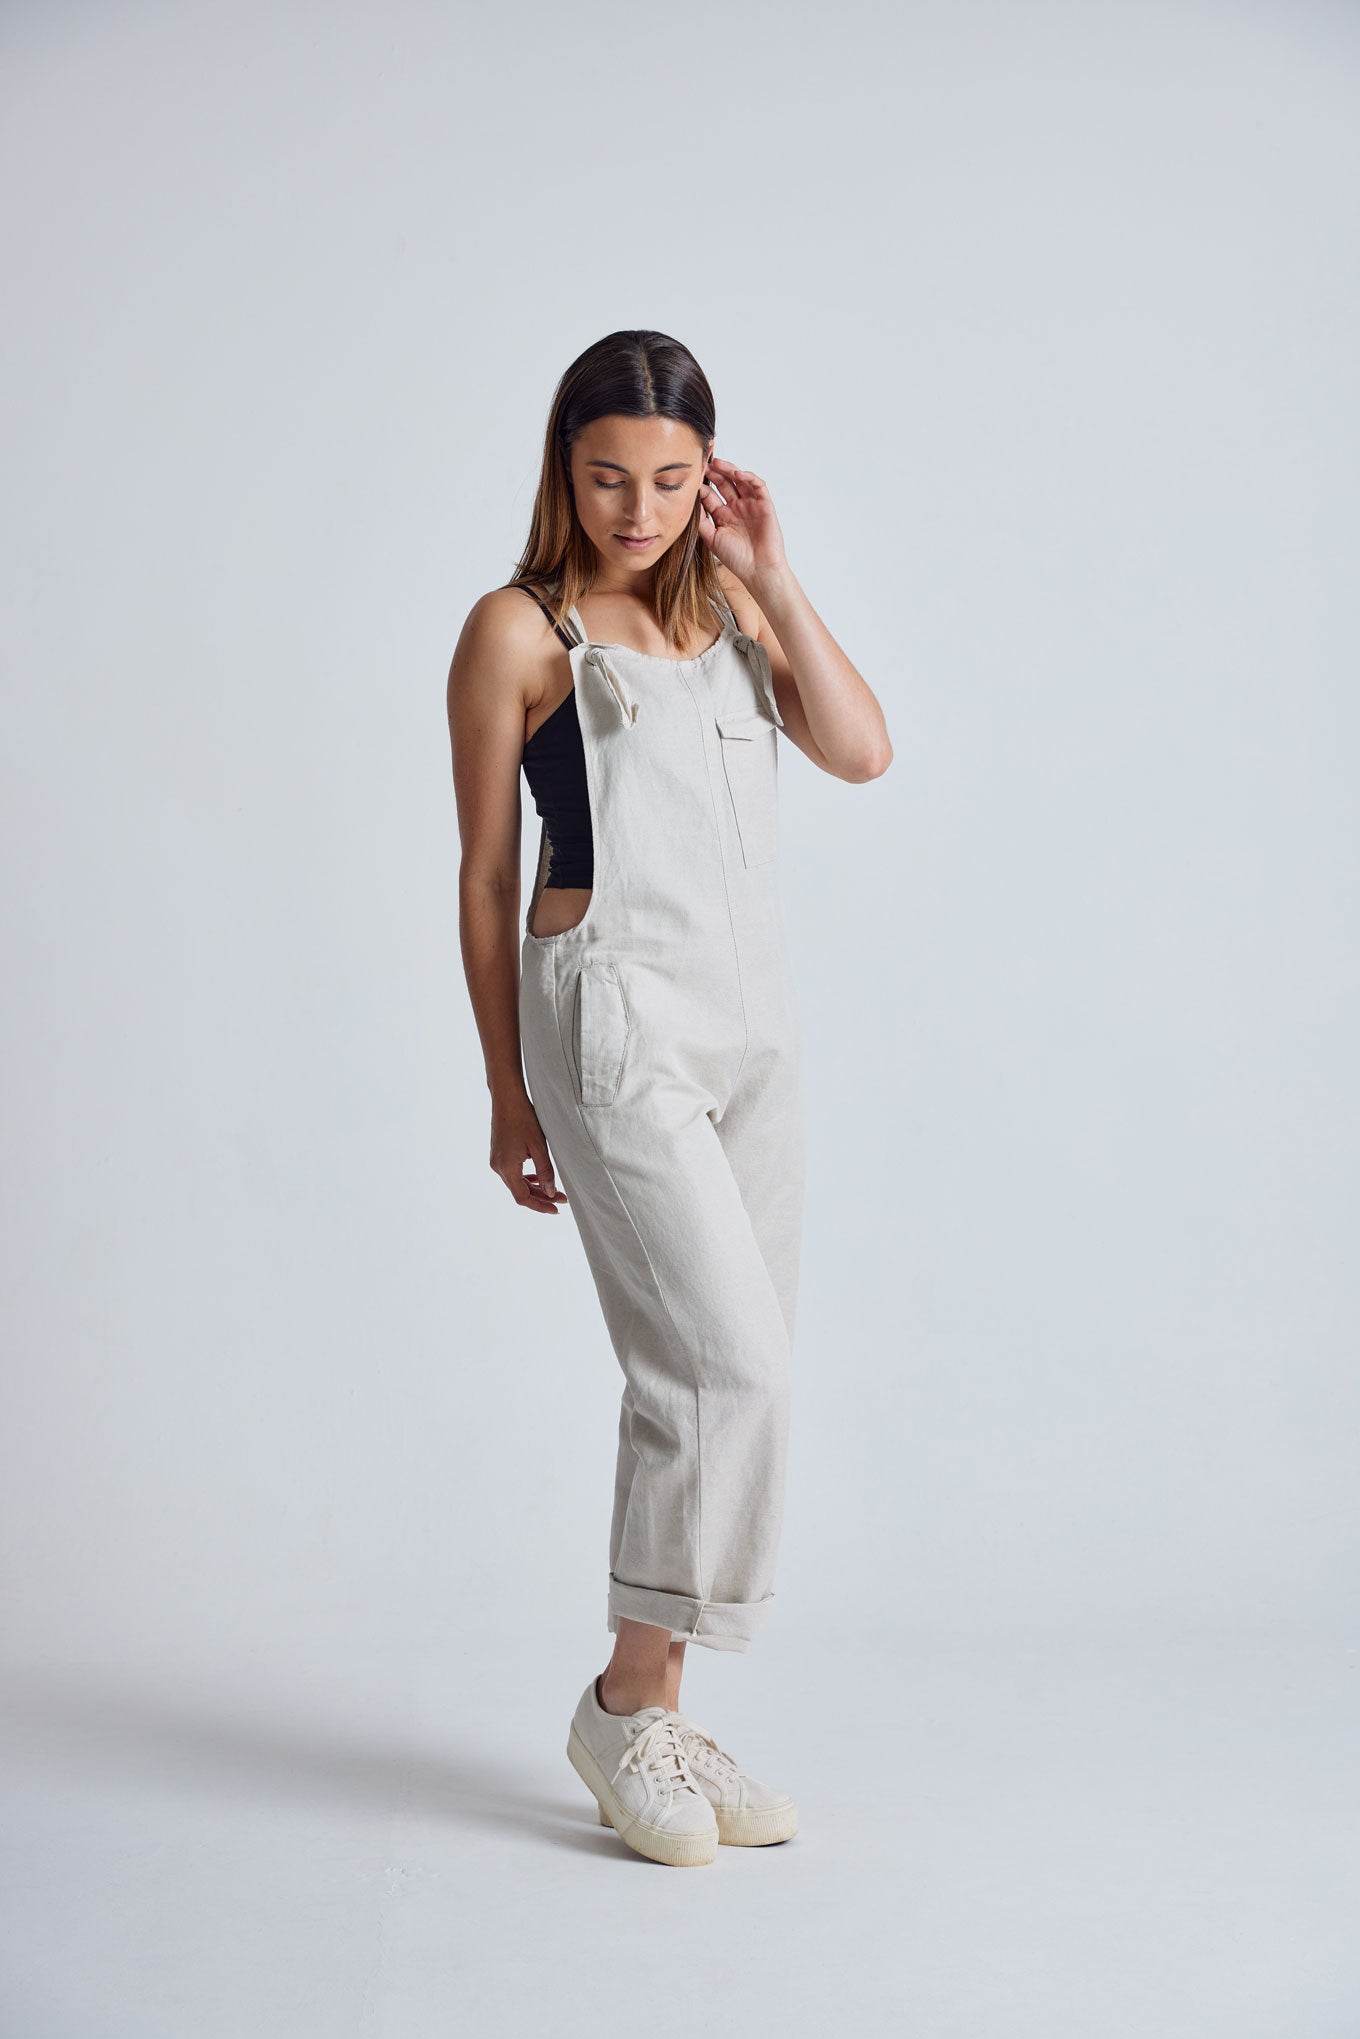 MARY-LOU Natural - GOTS Organic Cotton Dungarees by Flax & Loom, SIZE 1 / UK 8 / EUR 36